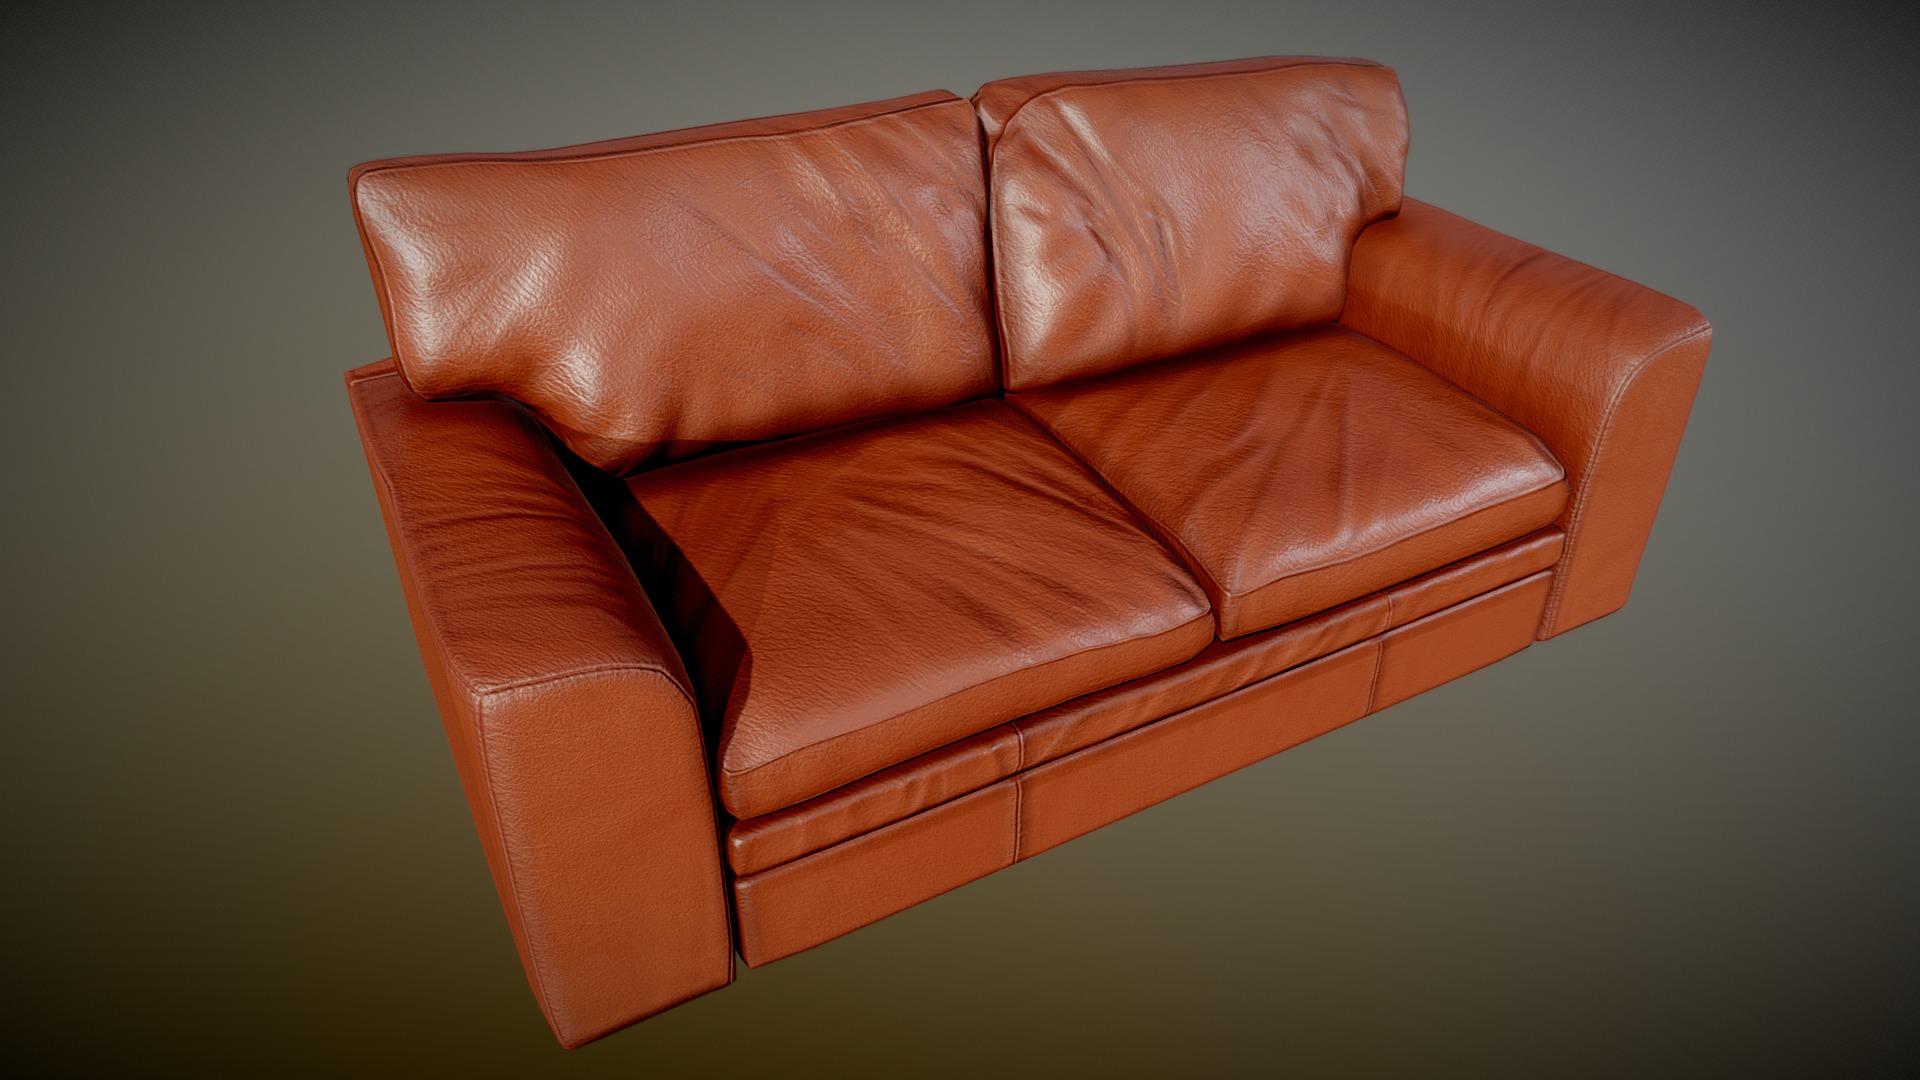 3D model Old Clean Leather Couch Cinnamon – PBR - This is a 3D model of the Old Clean Leather Couch Cinnamon - PBR. The 3D model is about a brown leather chair.